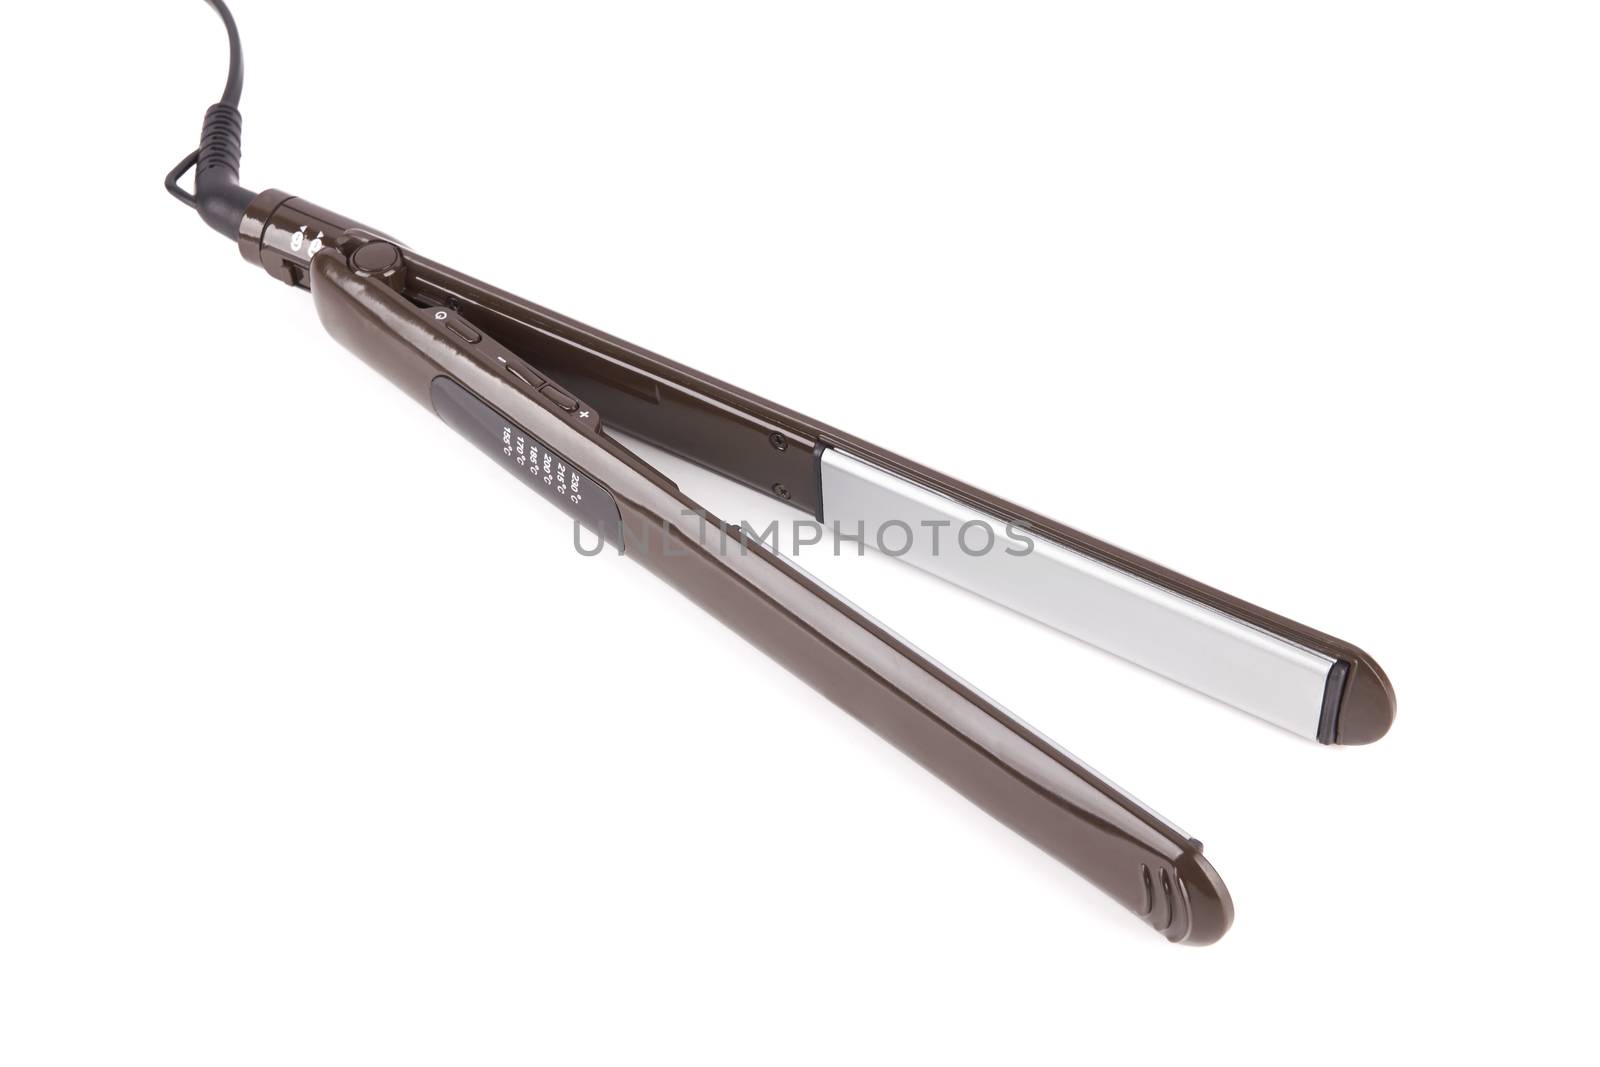 Hair straightener isolated on a white background